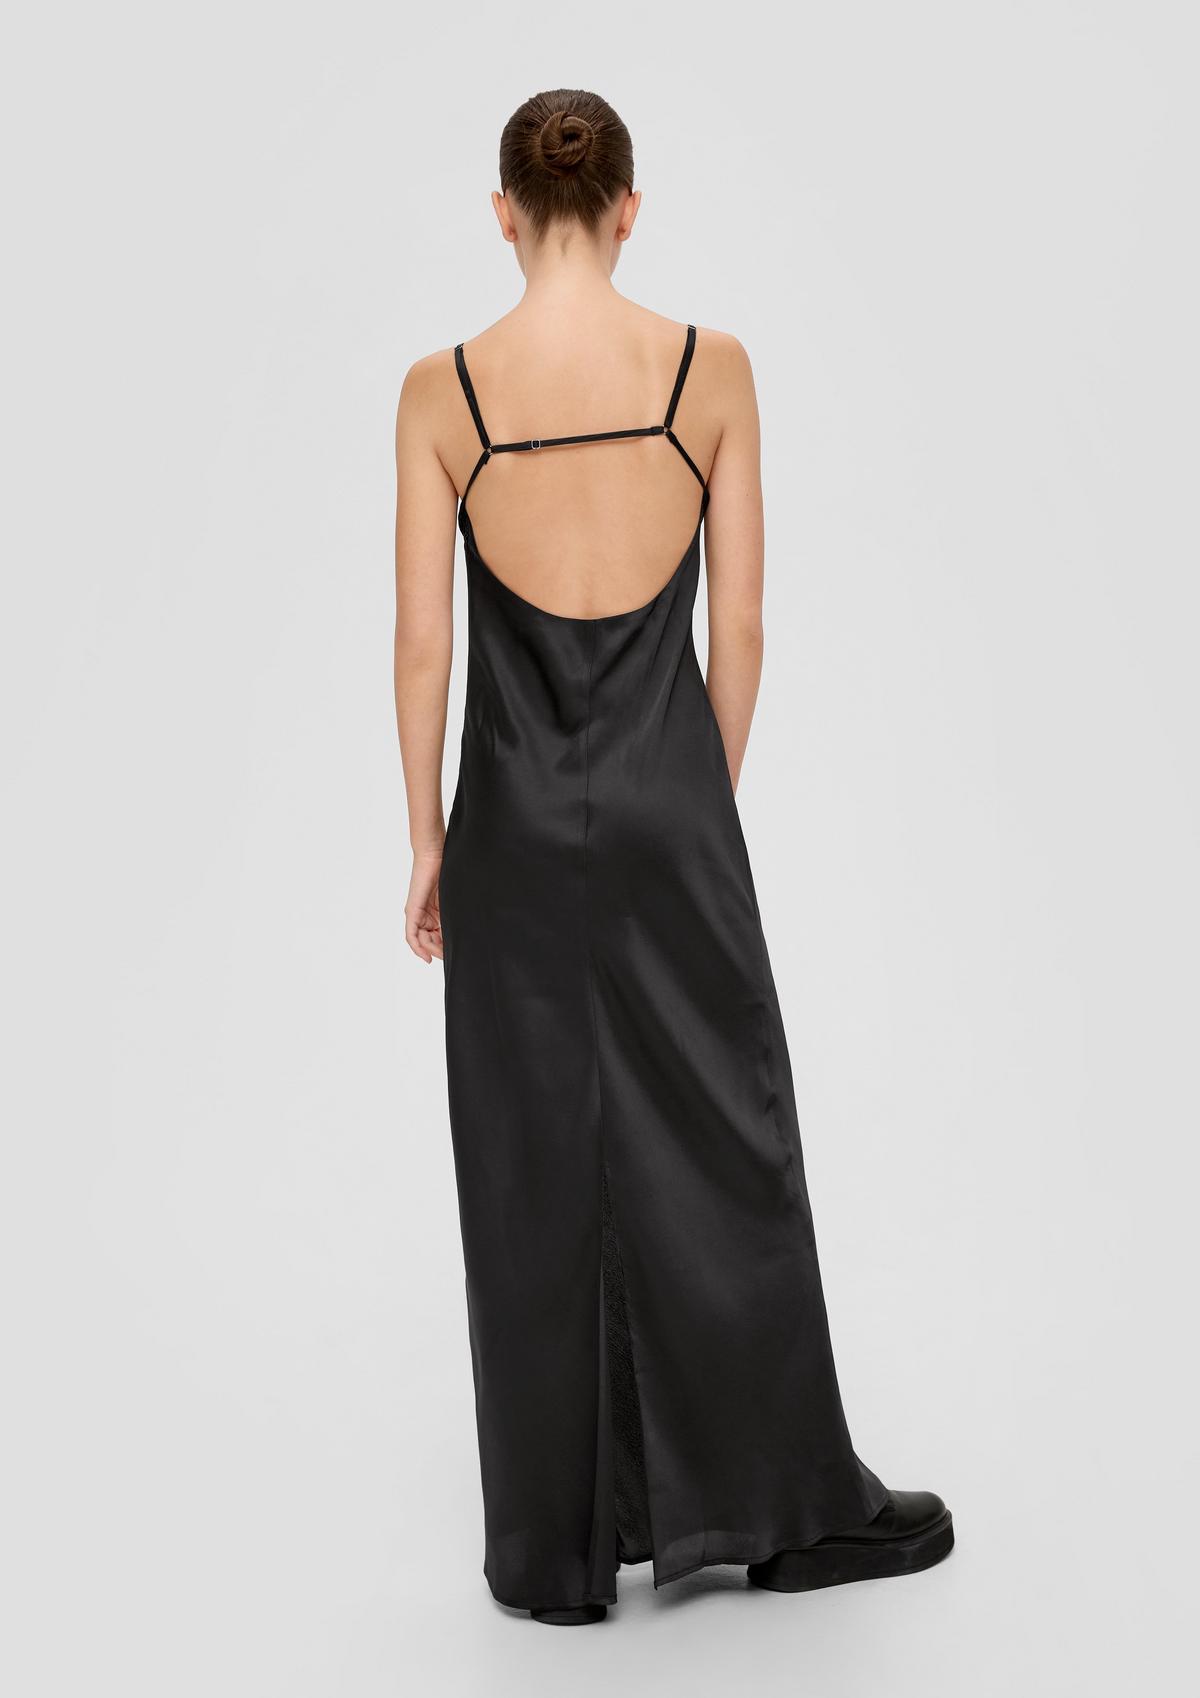 s.Oliver Satin dress with faux leather detail | QS x ELIF